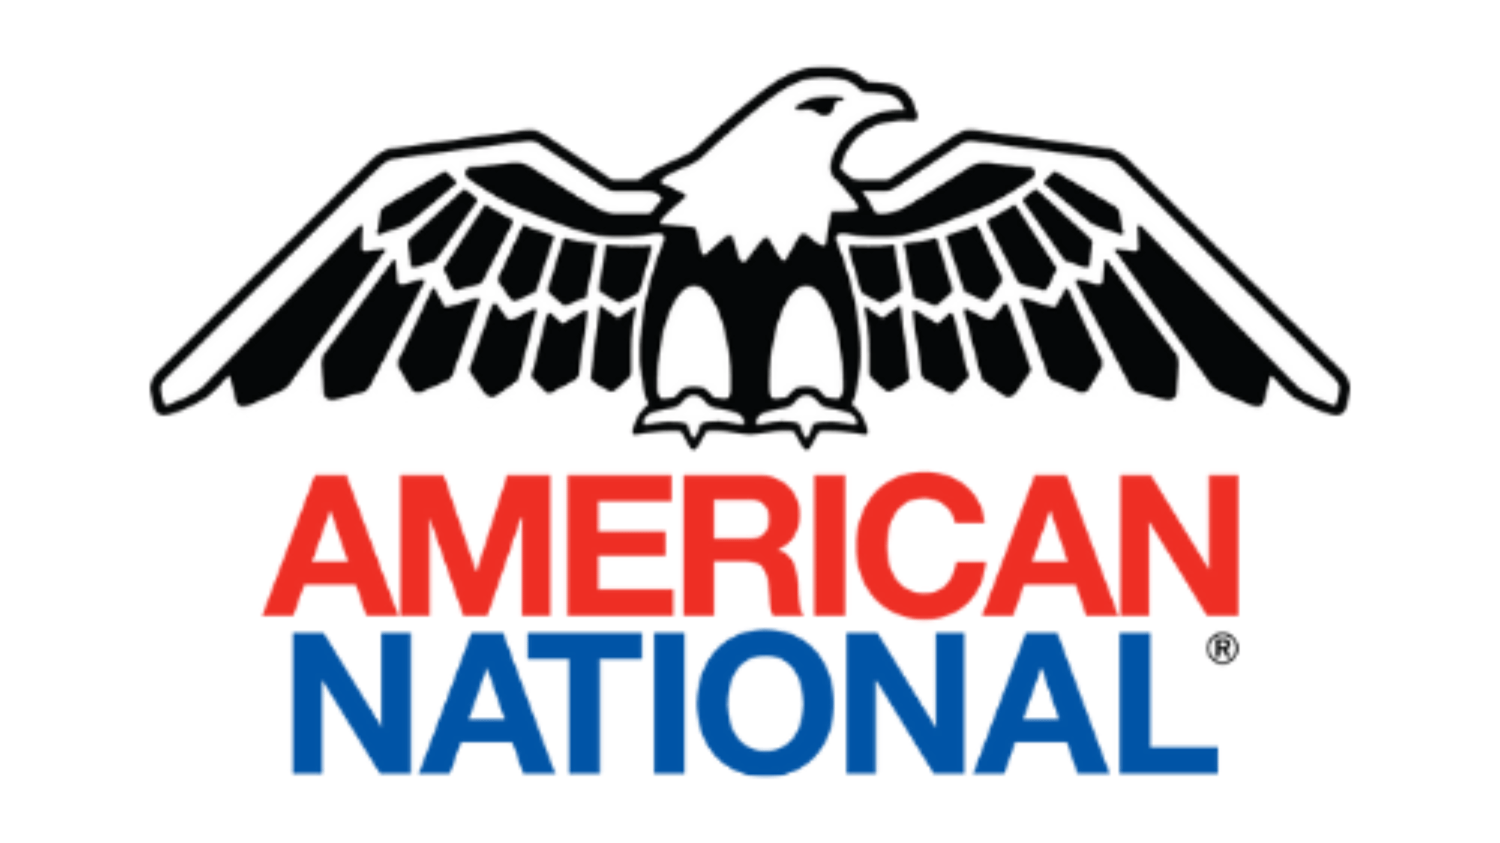 AMERICAN NATIONAL LIFE INSURANCE PRODUCTS REVIEW: PROS & CONS